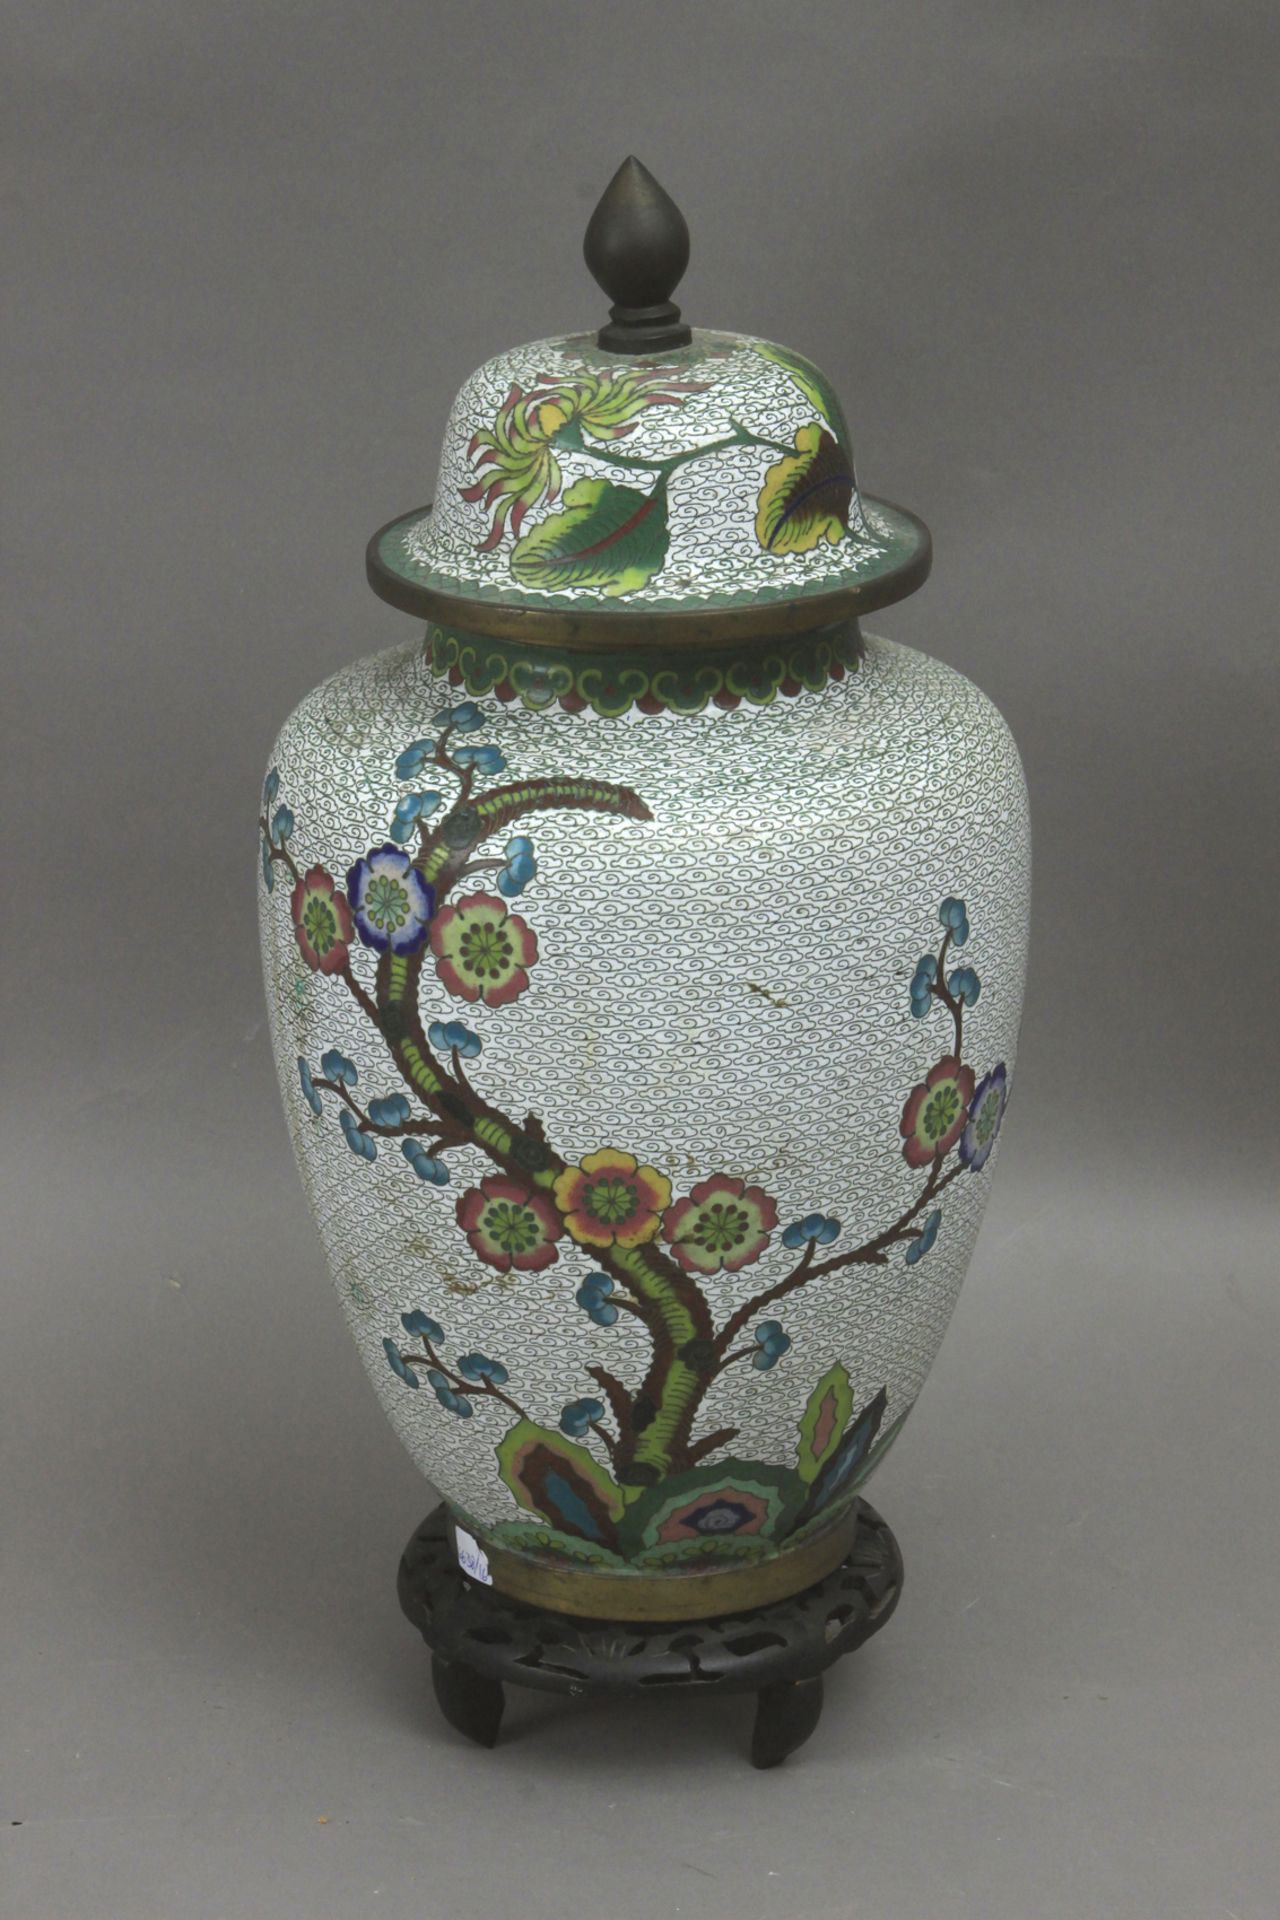 A 19th century Japanese tibor in bronze and cloisonné enamel - Image 2 of 4